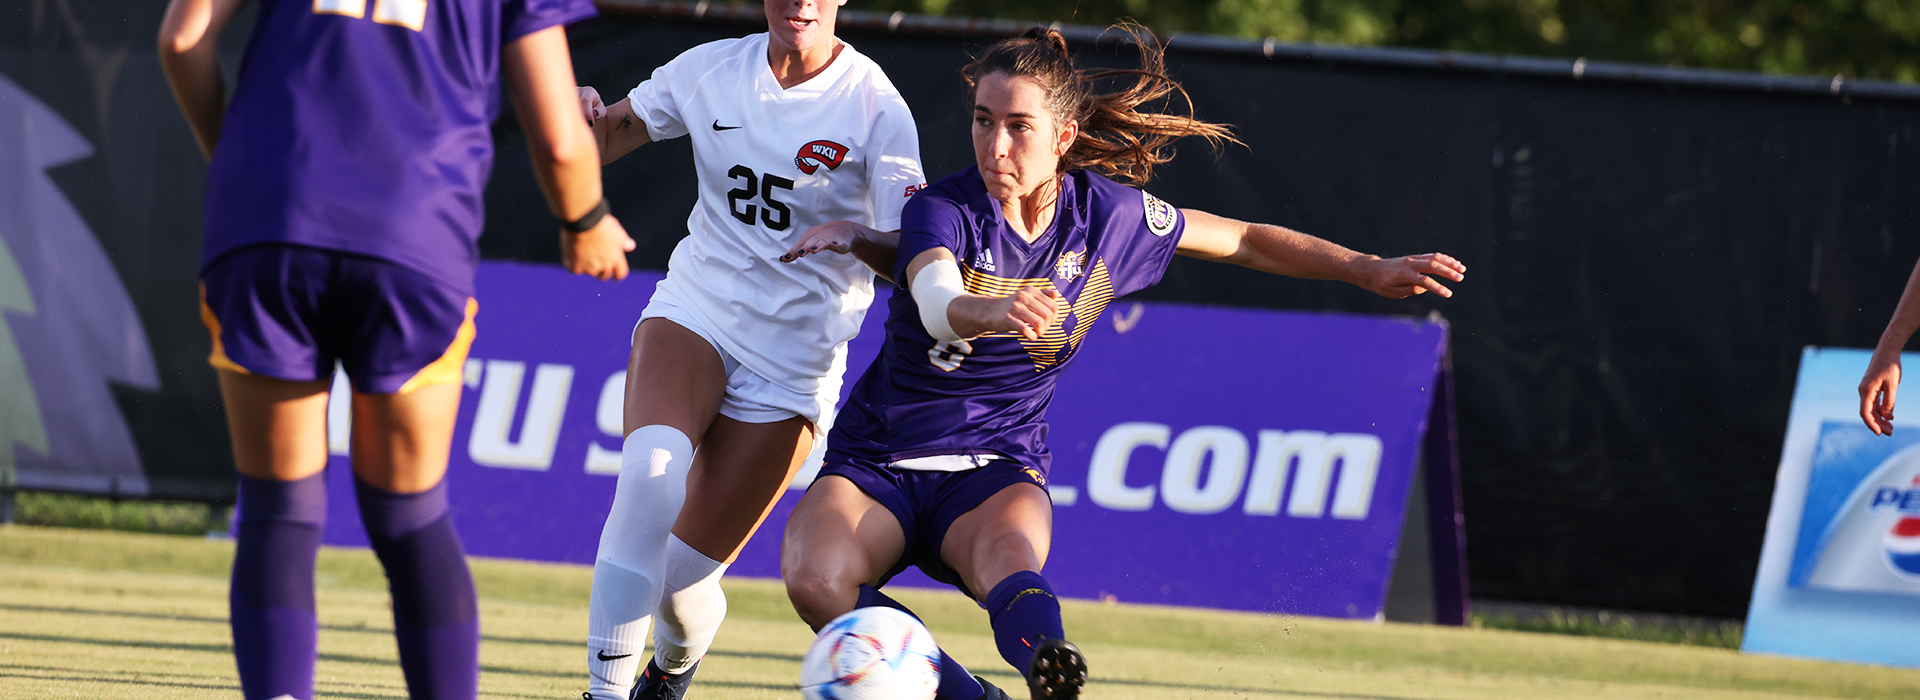 Late Golden Eagle goal lifts Tech to 1-1 draw against WKU